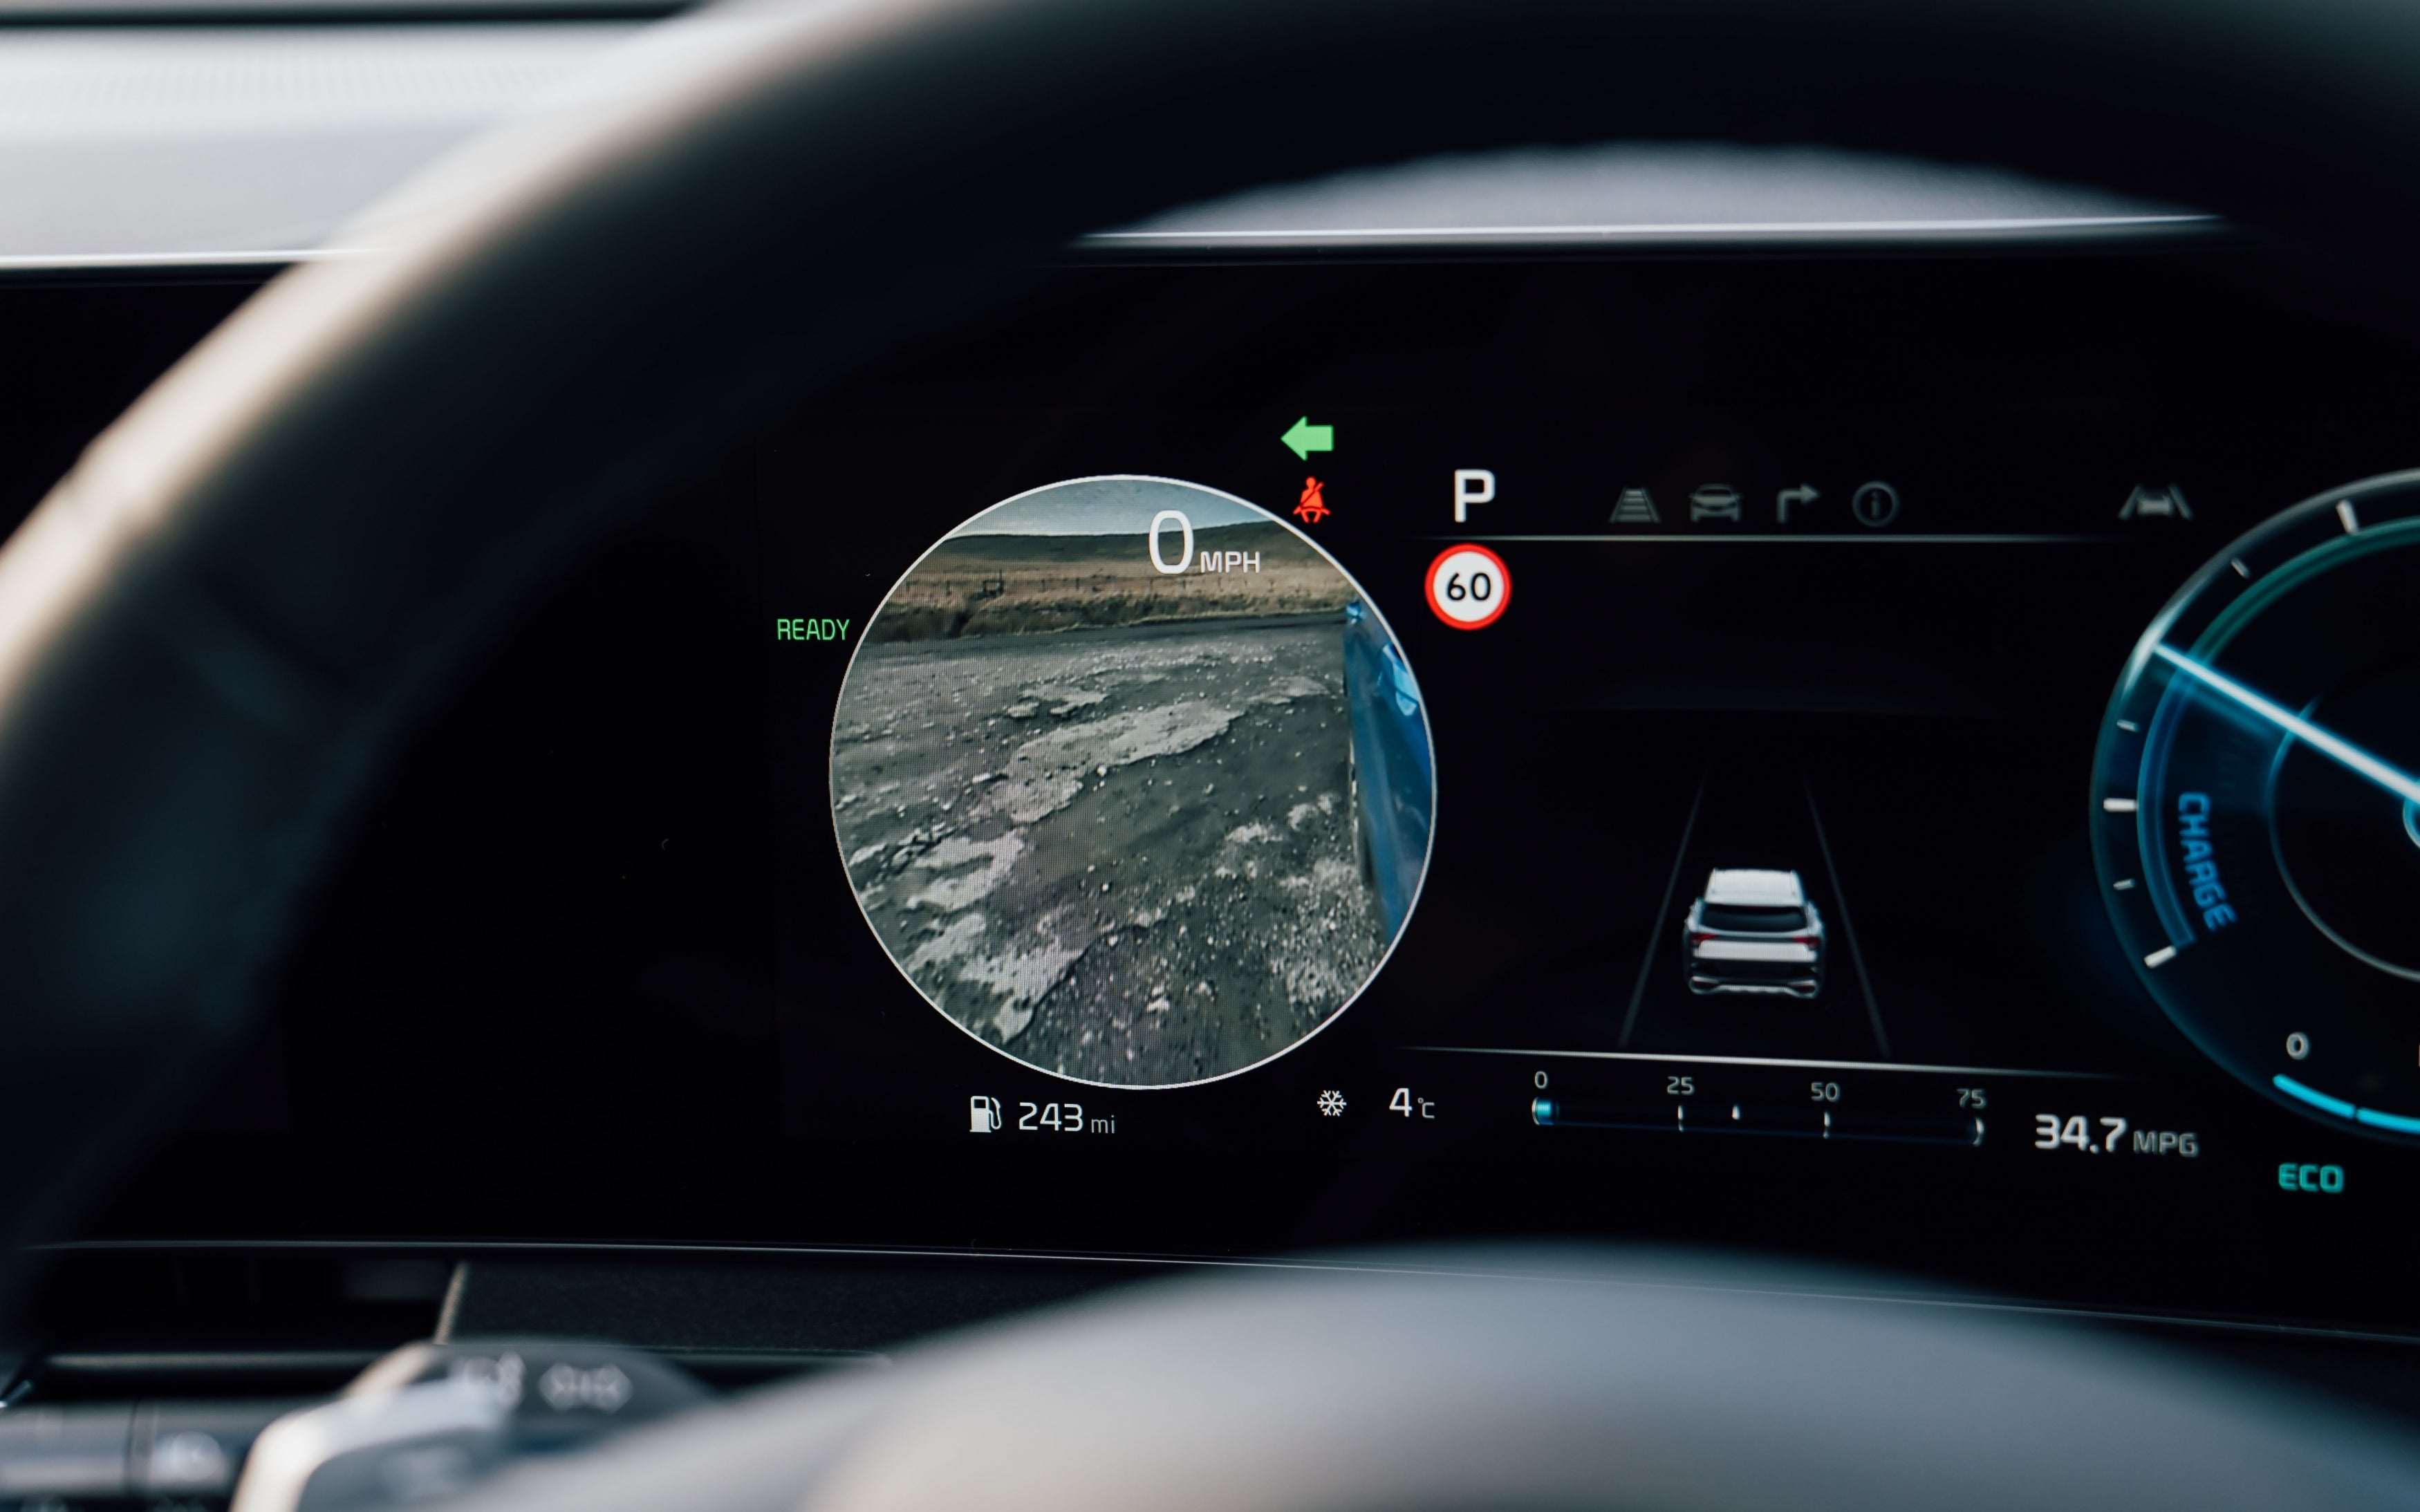 All versions come with a rear-view camera